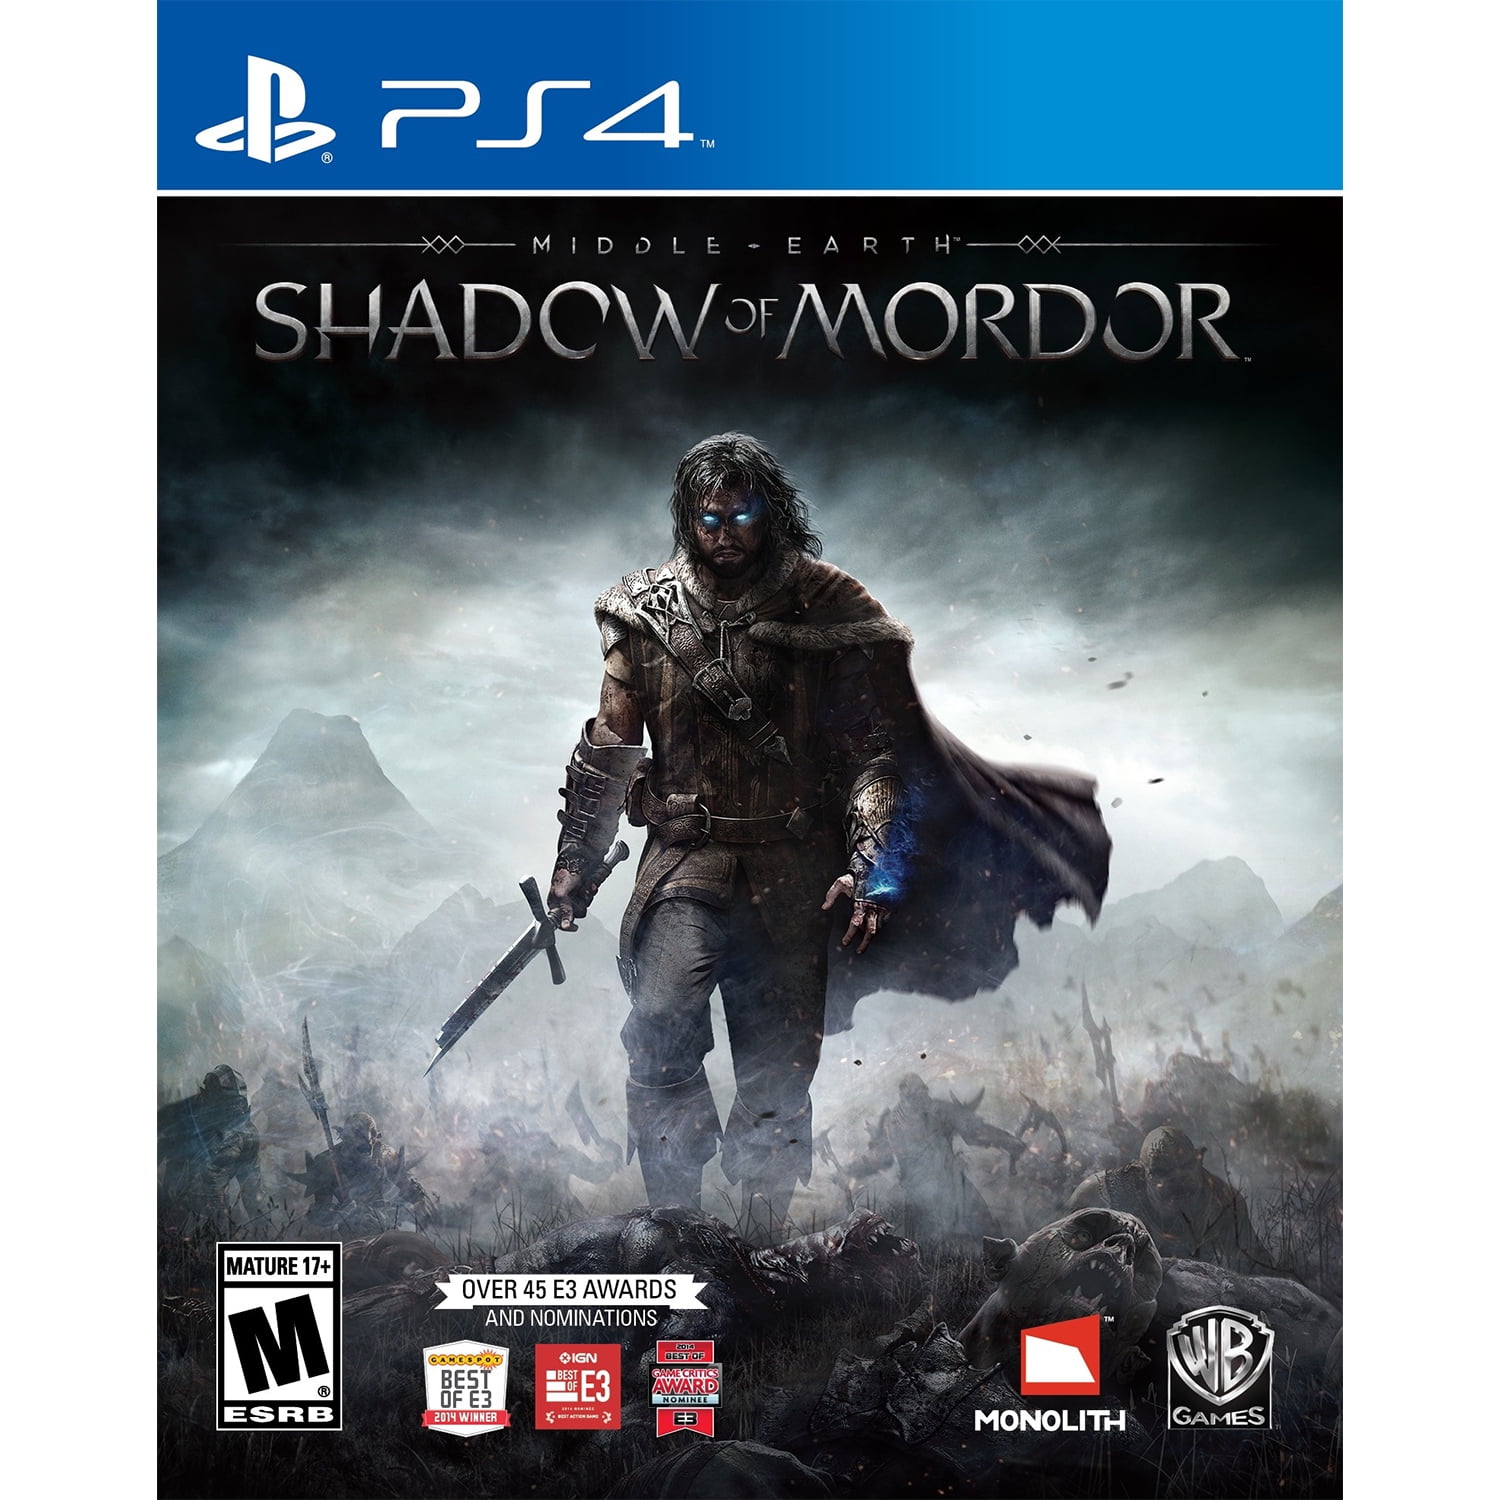 Middle-earth: Shadow of Mordor: Lord of the Hunt - IGN